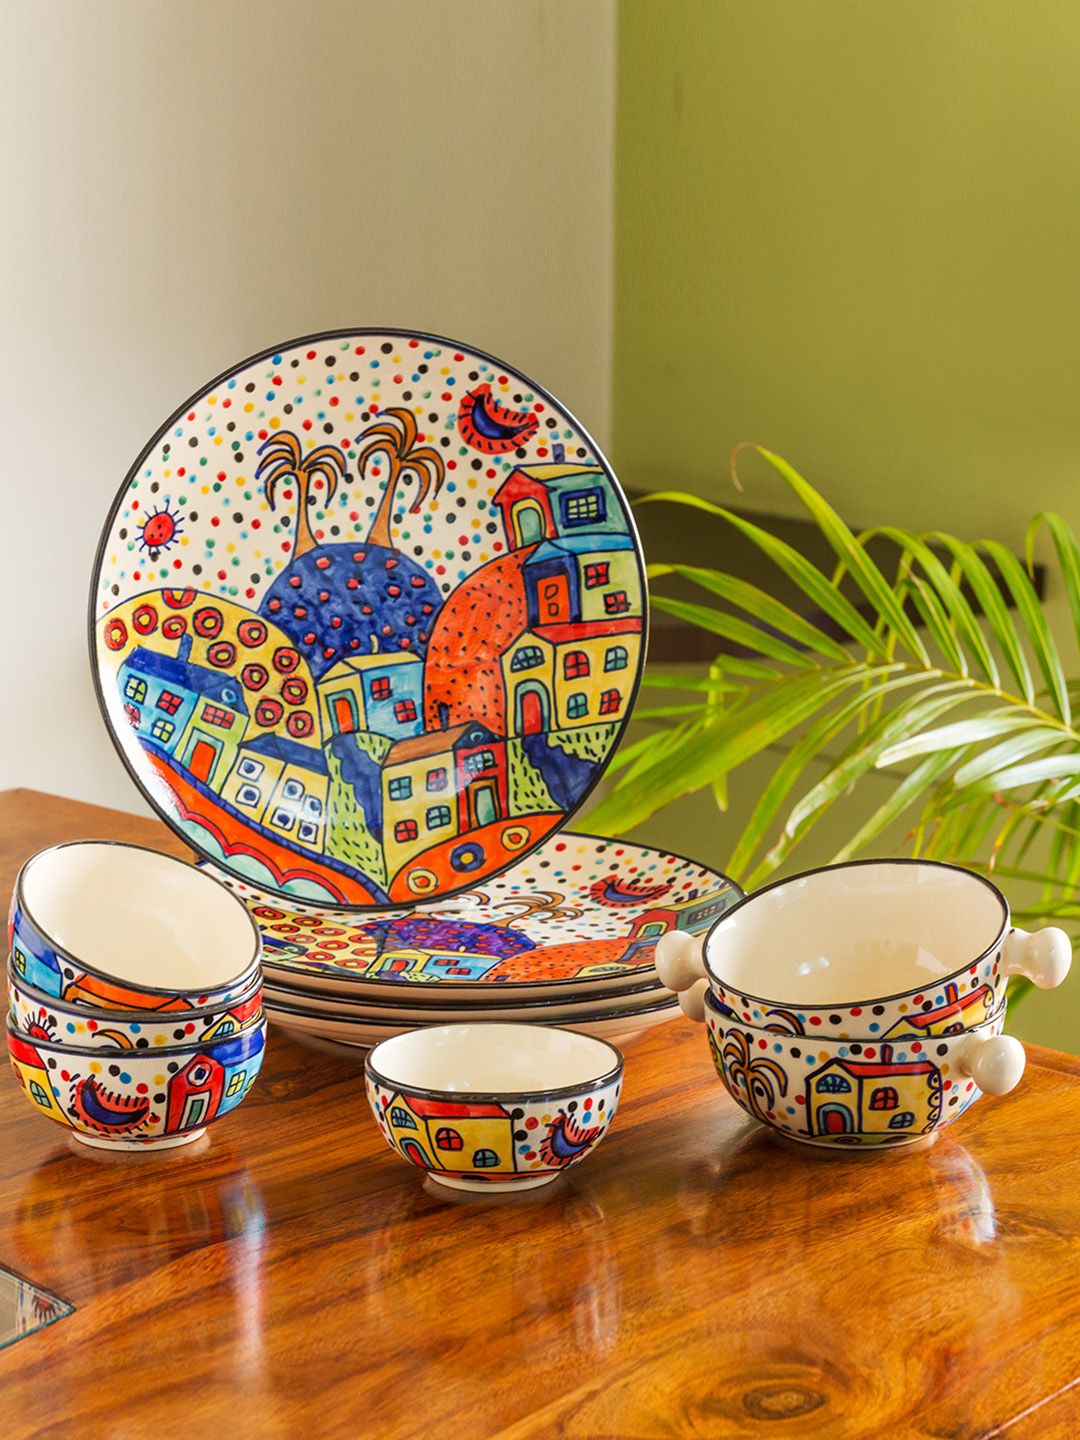 Handpainted Ceramic Dinner Plates With Katoris & Serving Bowls (10 Pieces, Serving for 4) Price in India